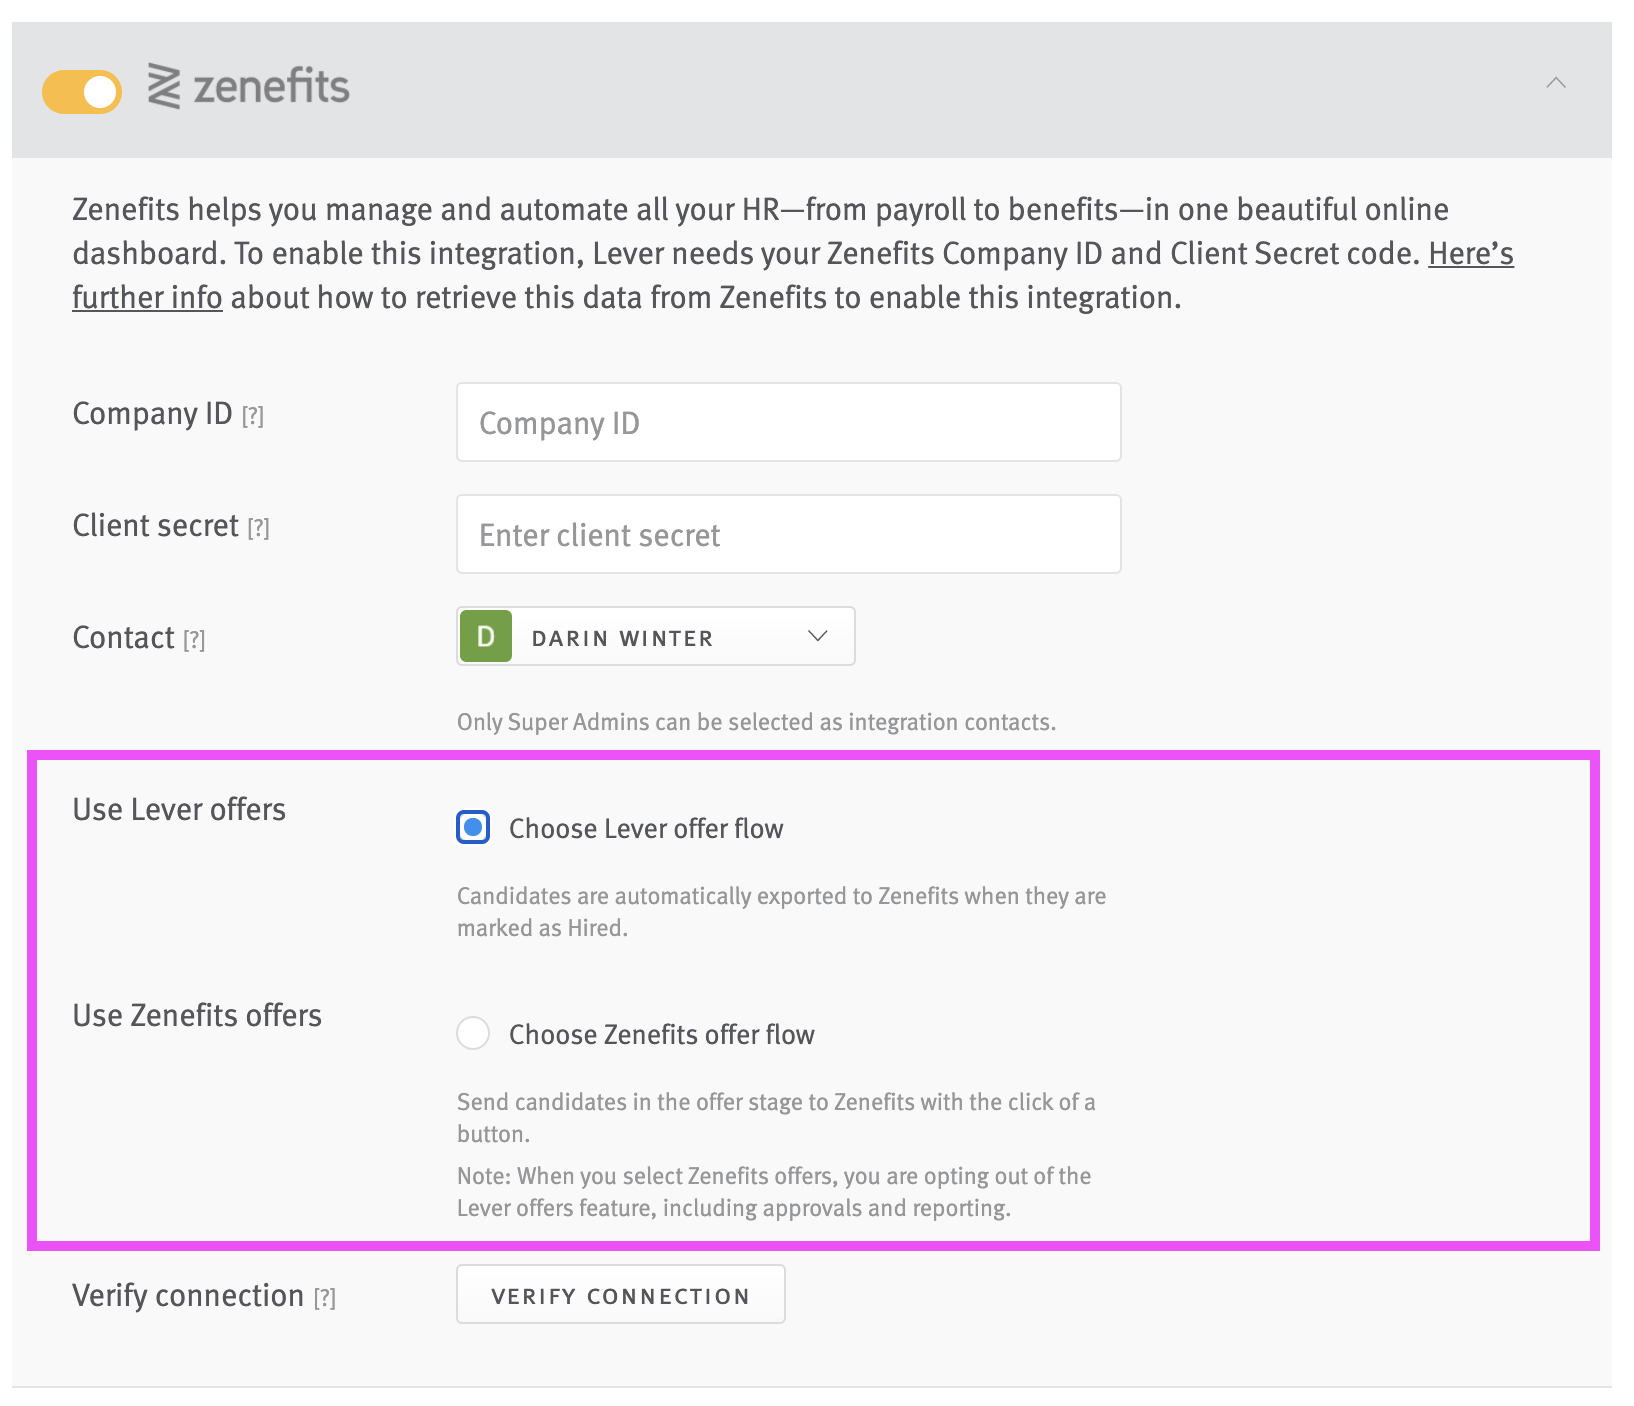 Lever zenefits setting with choose lever offer flow and use zenefits offers outlined